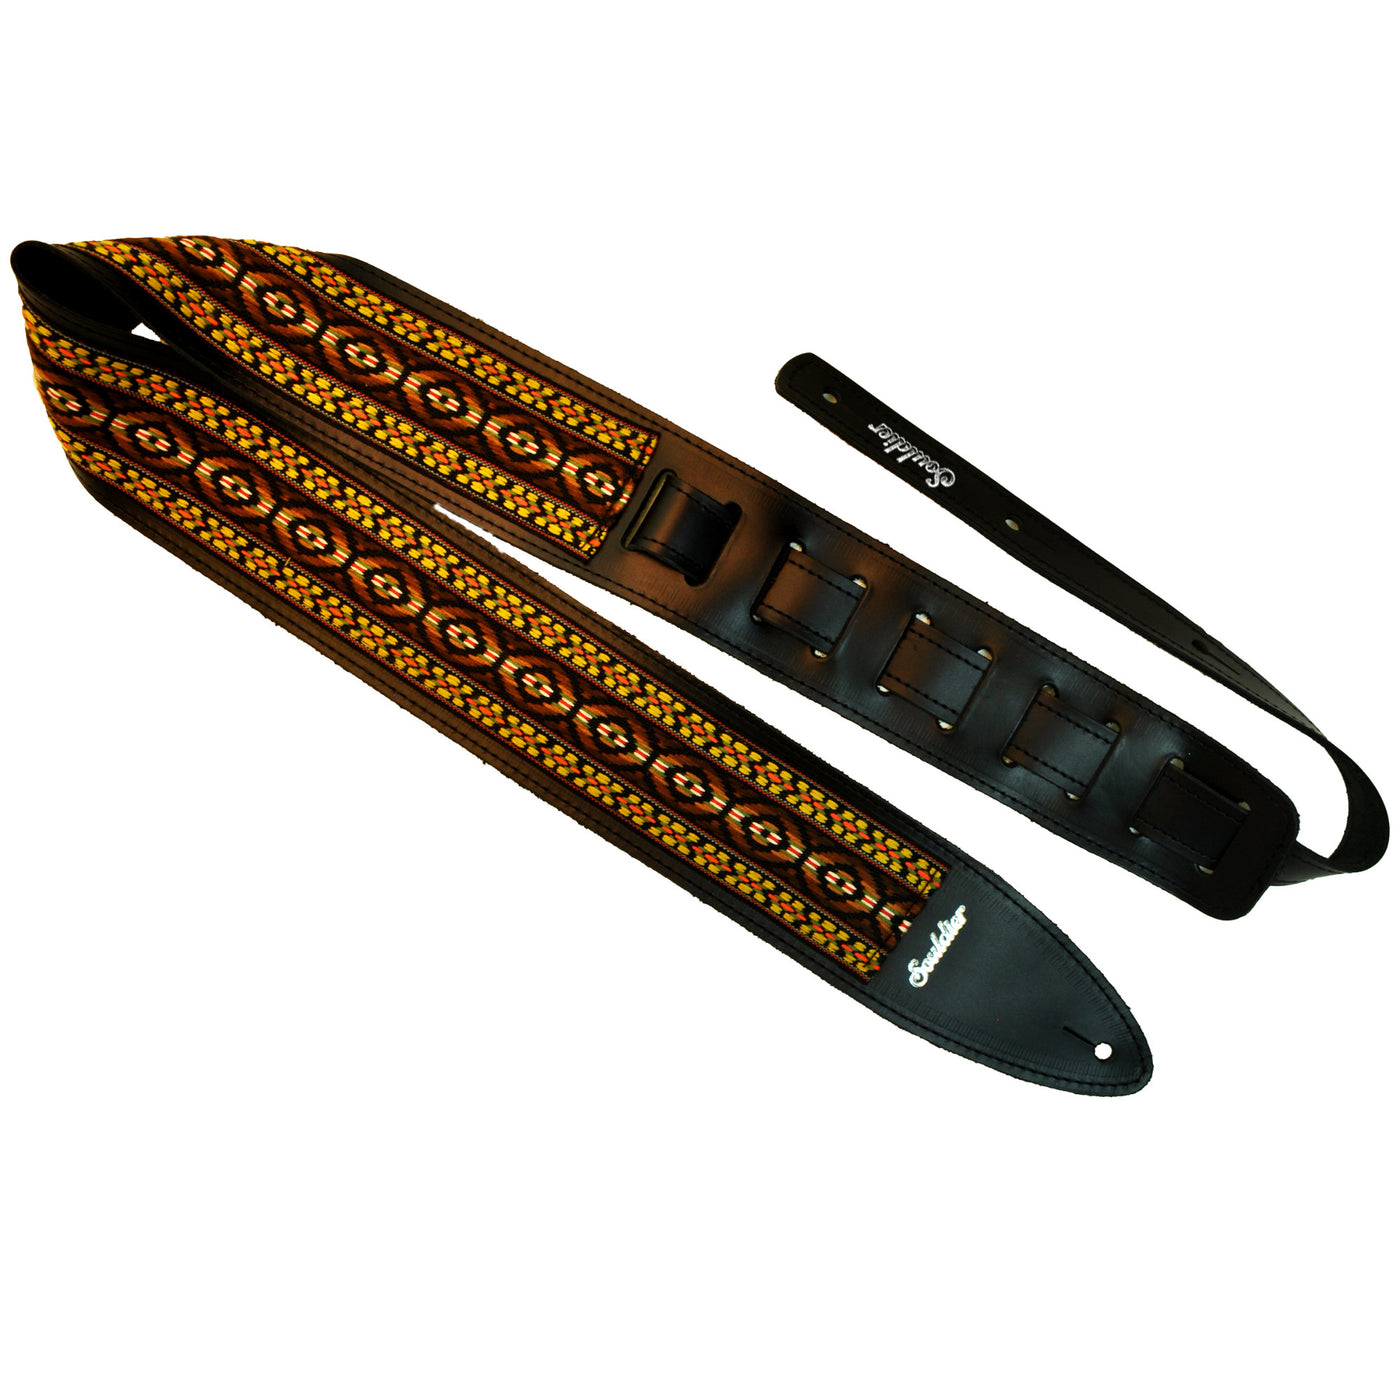 Souldier TGS0259BK02BK - Handmade Souldier Fabric Torpedo Strap for Bass, Electric, or Acoustic Guitar, Adjustable Length from 42.5" to 55" Made in the USA, Brown